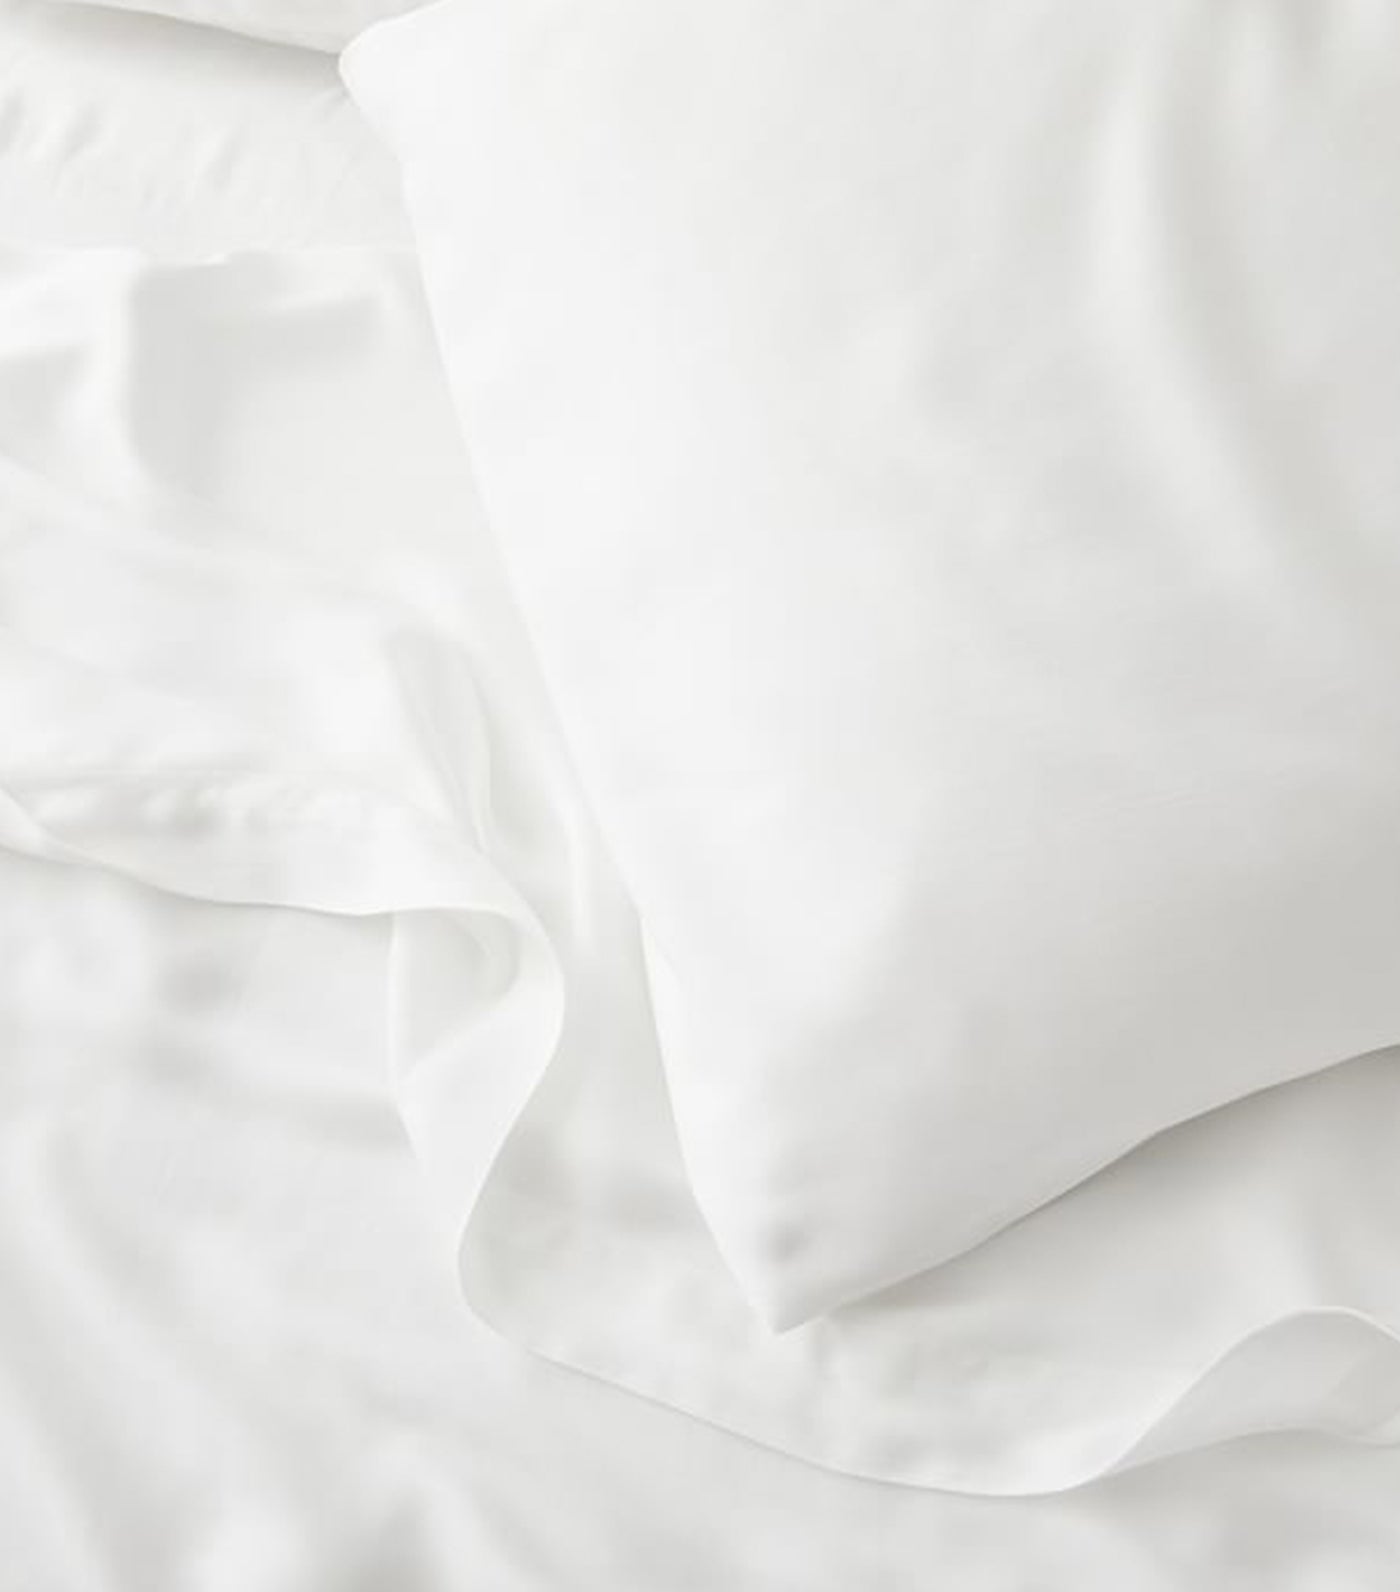 west elm Brushed Silky TENCEL™ Sheet Sets & Pillowcases - White